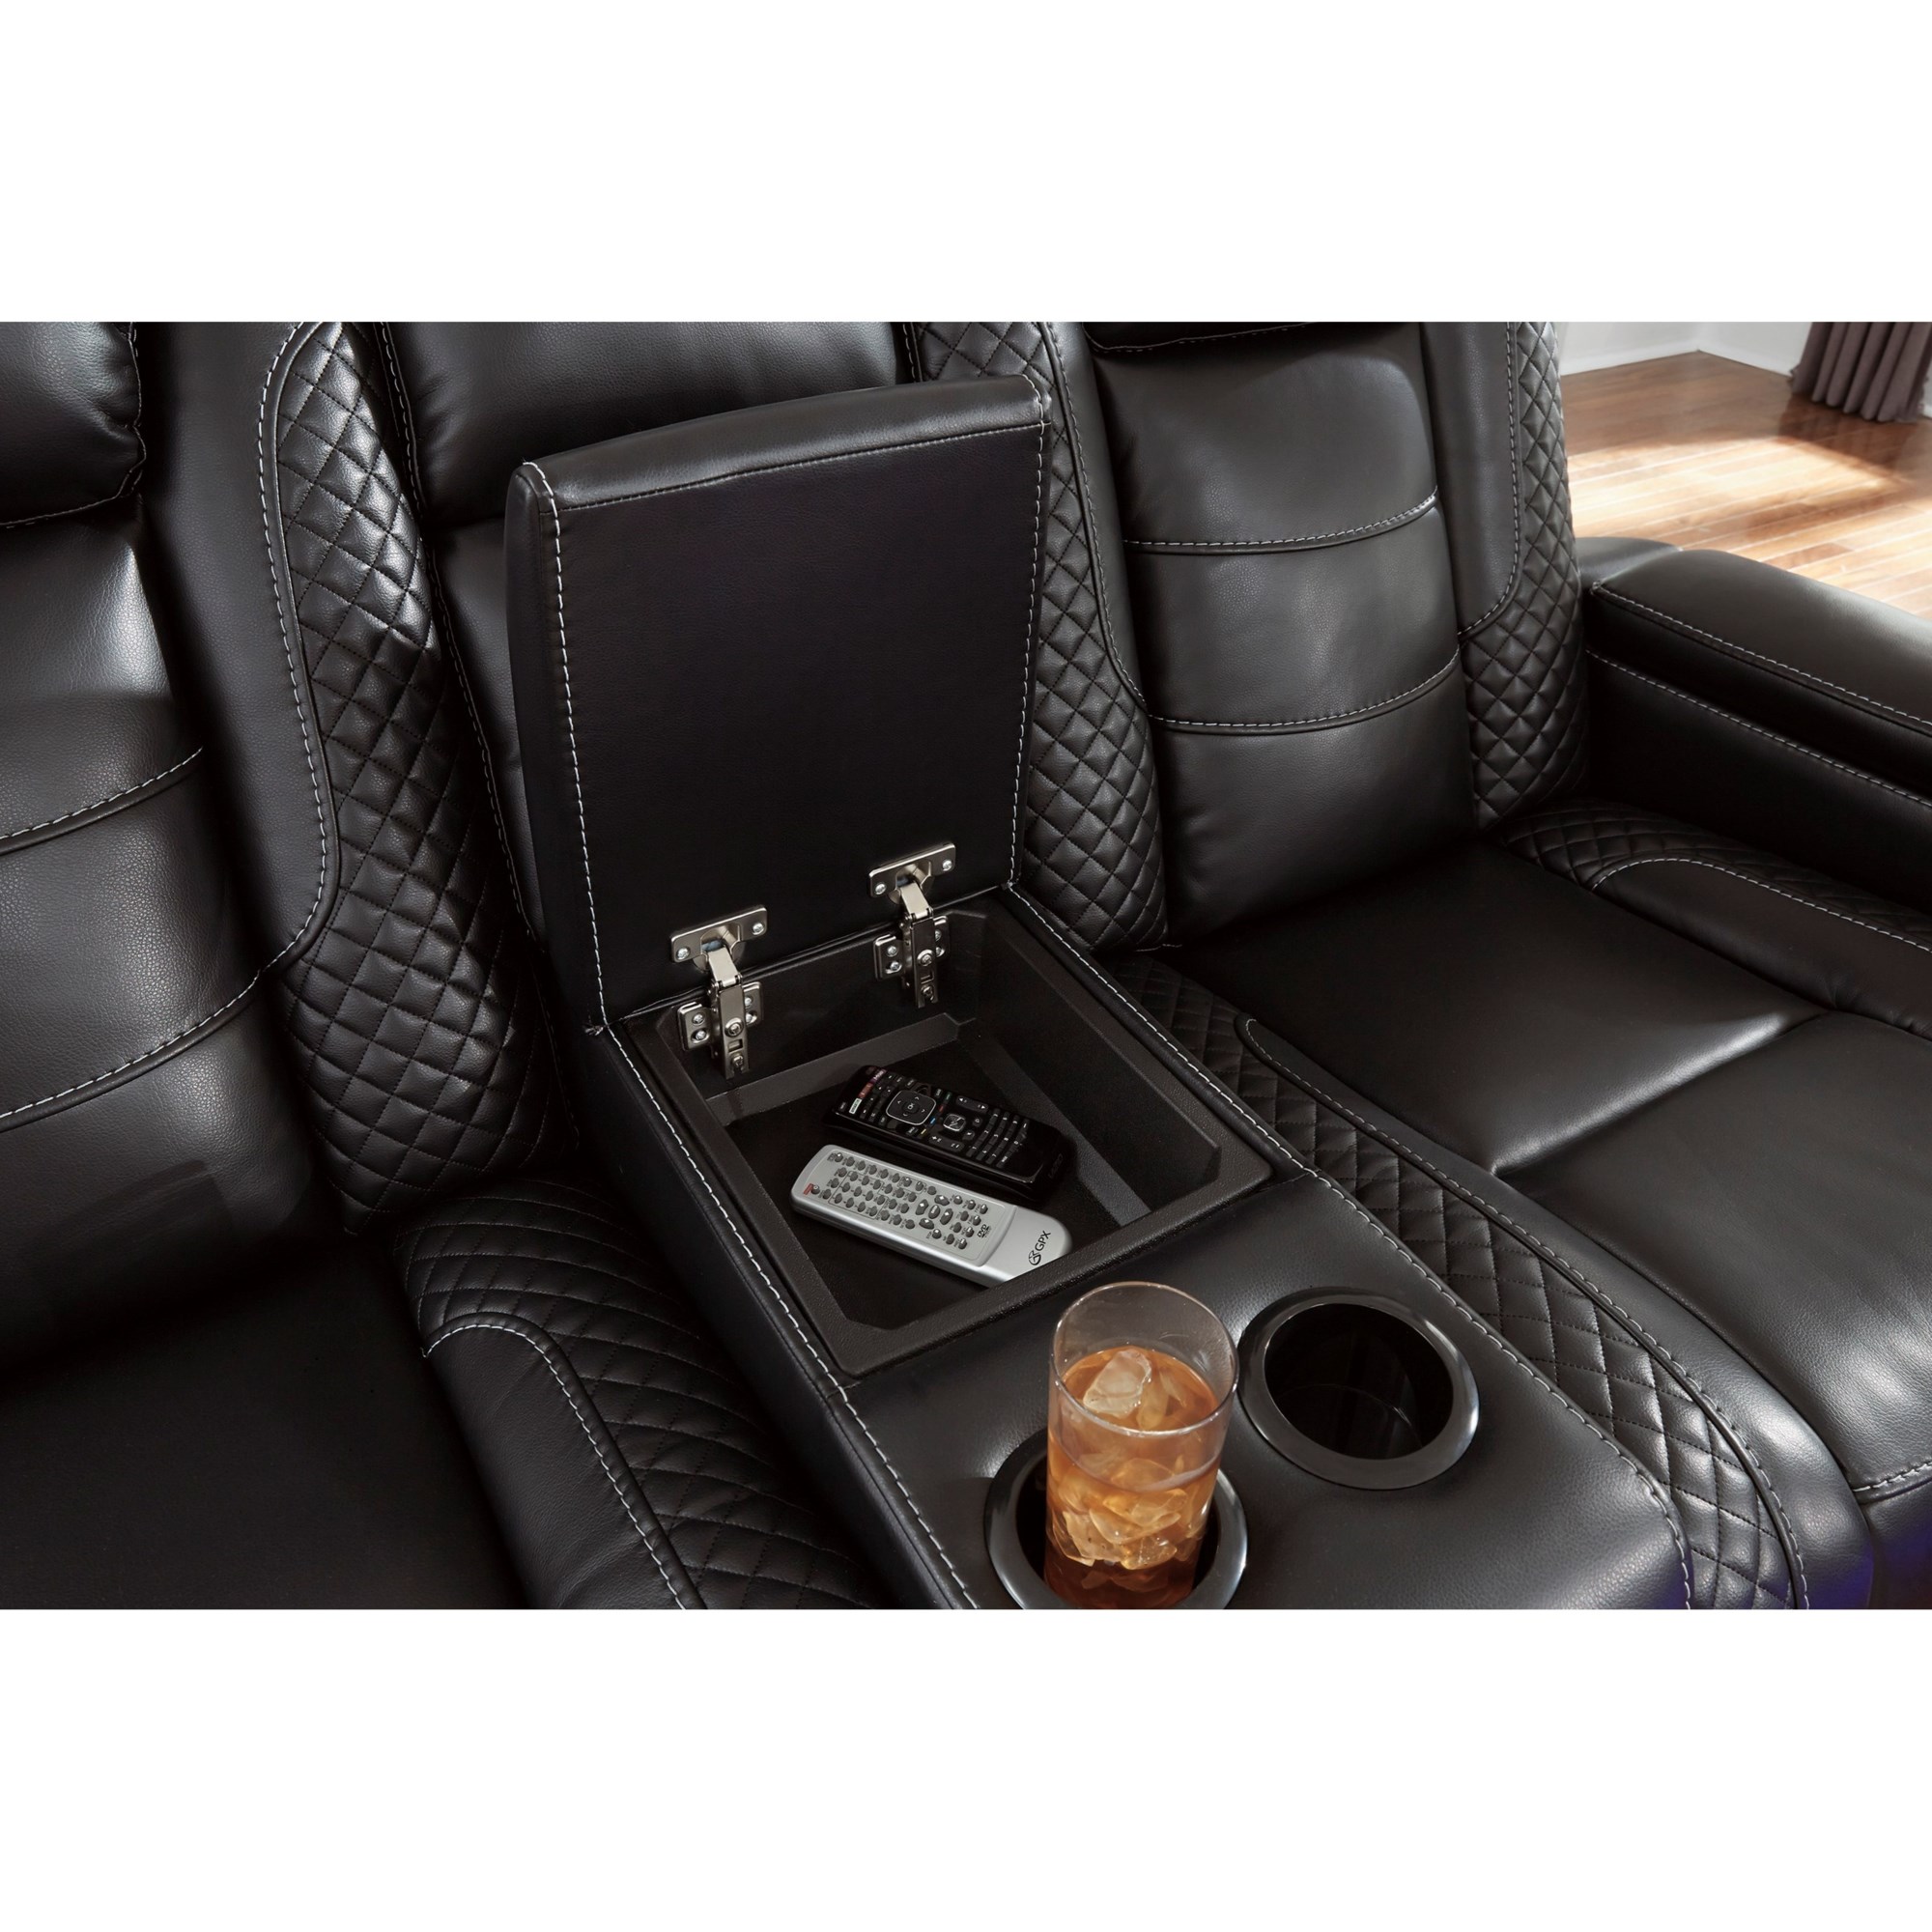 Signature Design by Ashley Party Time Power Recliner with Power Headrest in  Midnight